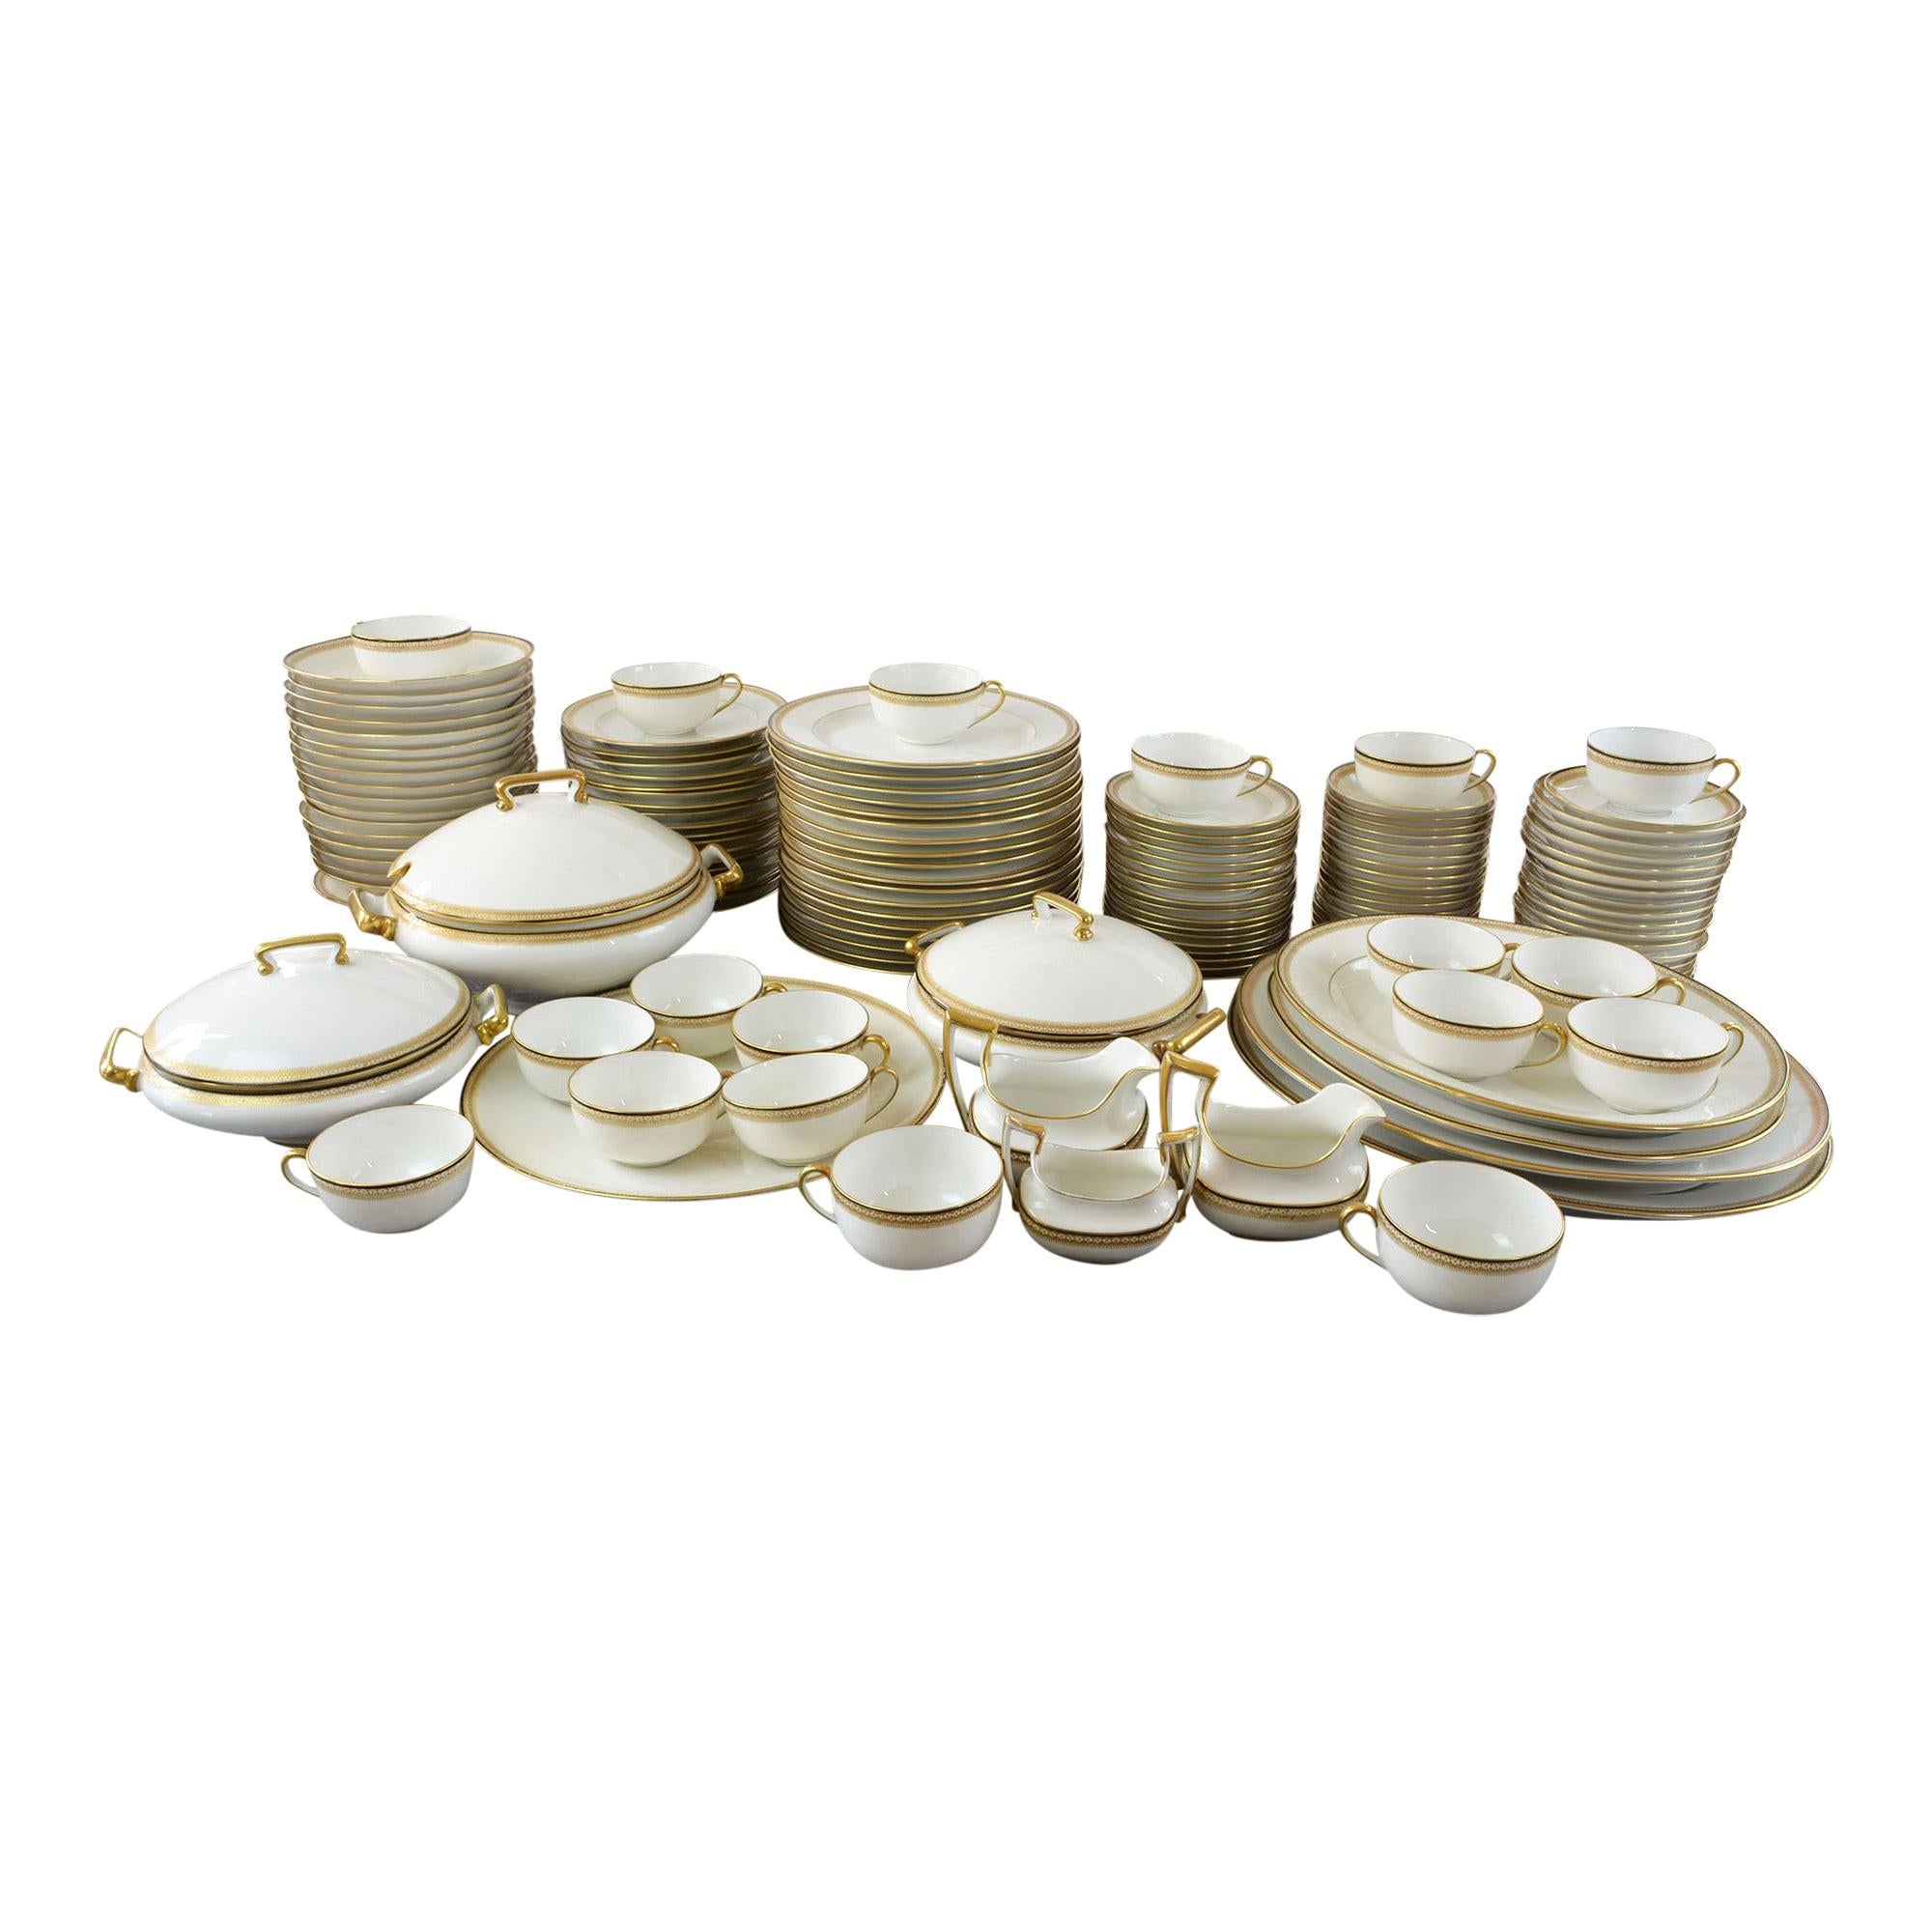 137 Piece Set China by Tressemann and Vogt of Limoges Service for 18